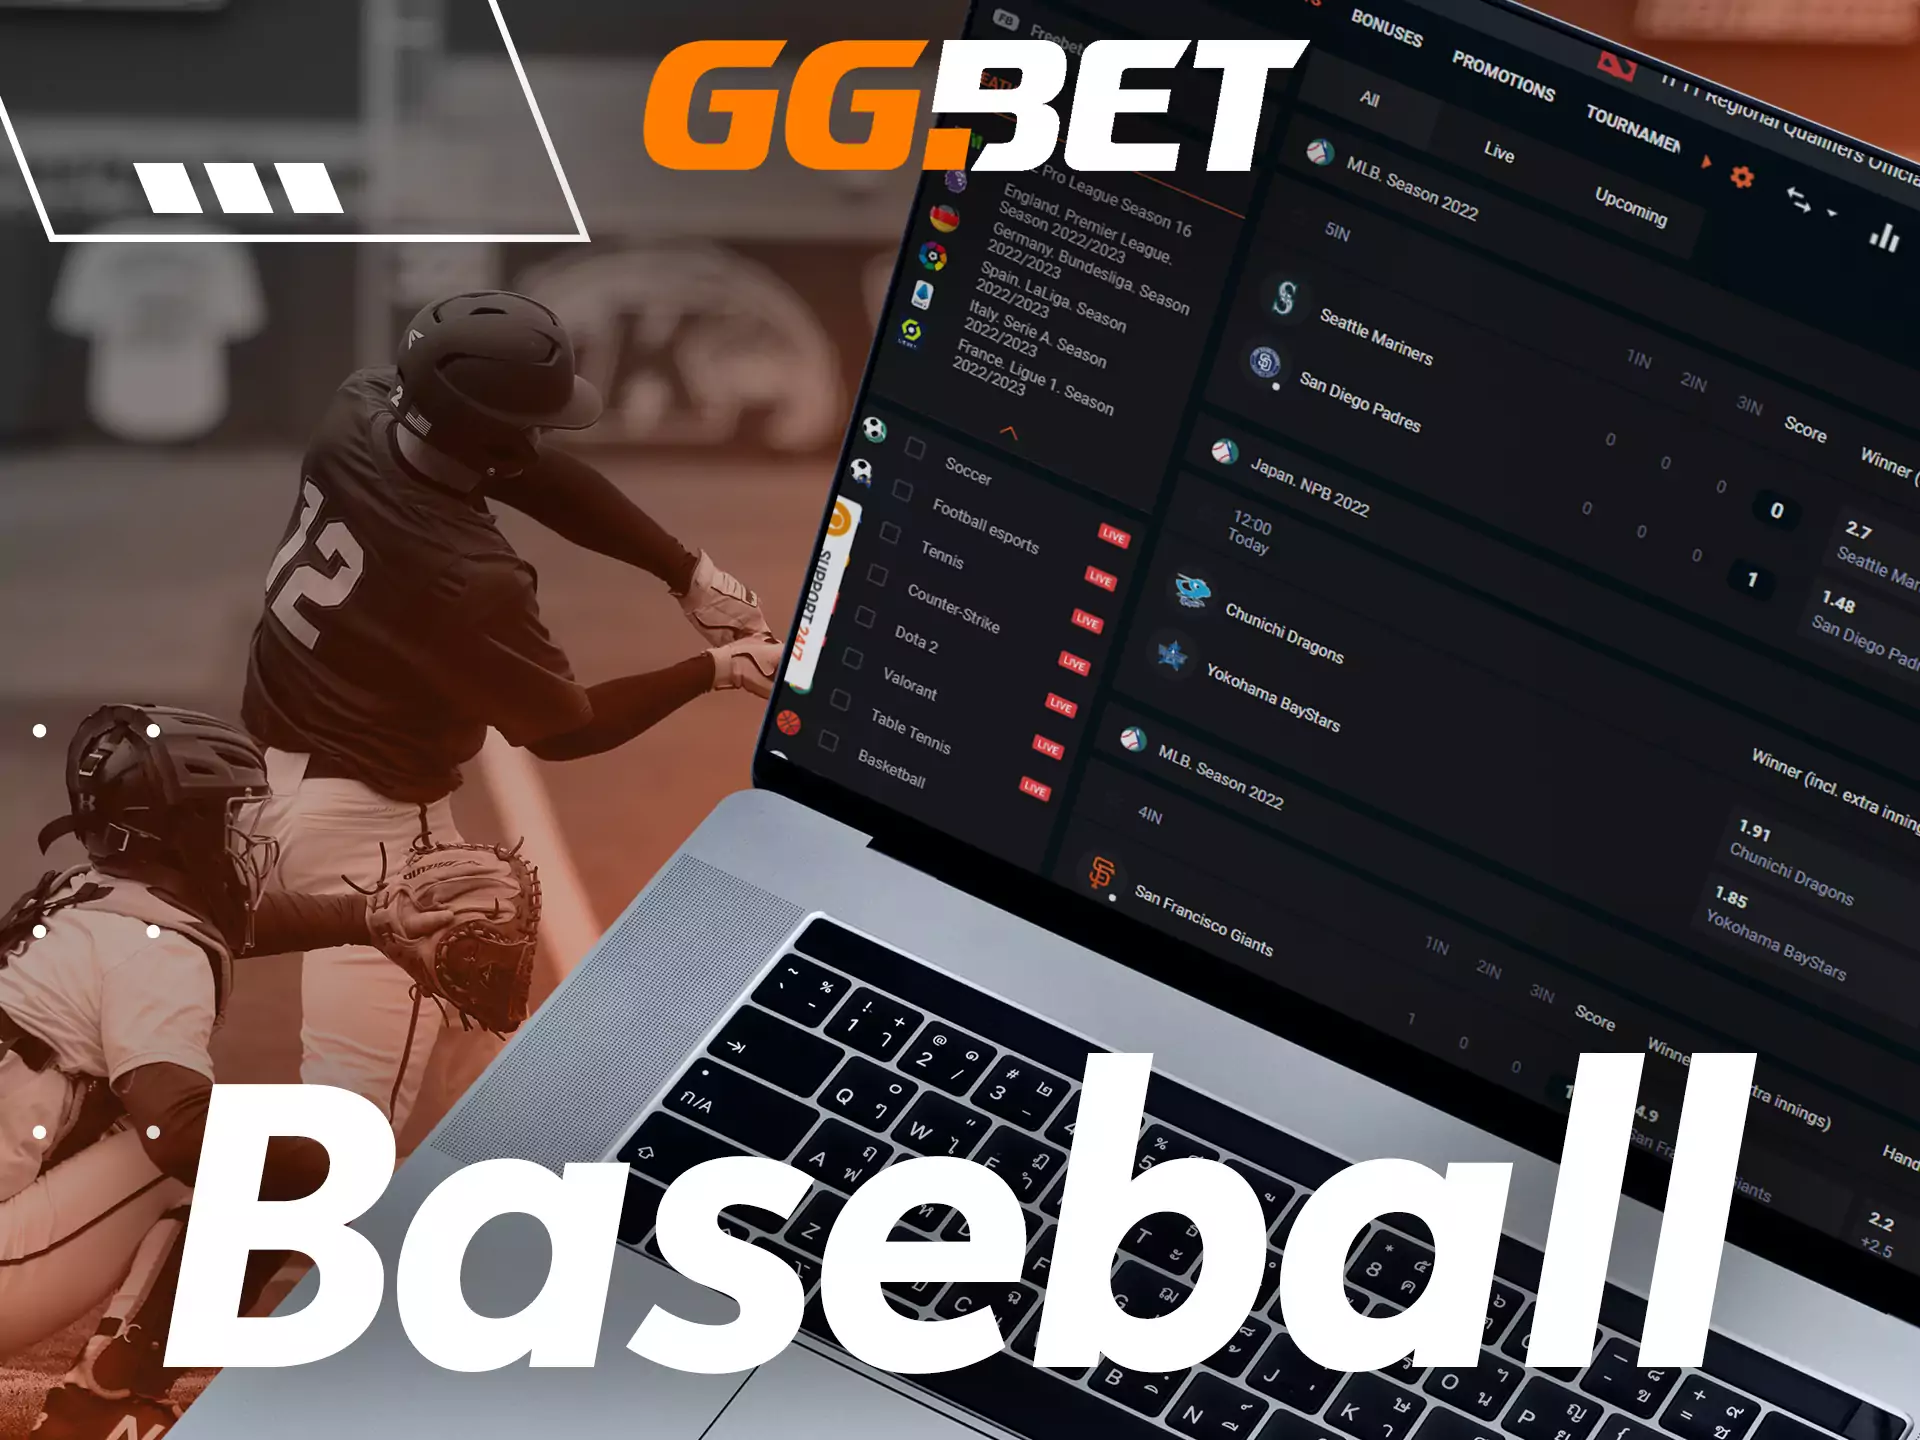 Betting on baseball with high odds attracts fans of this kind of sport to GGBet.